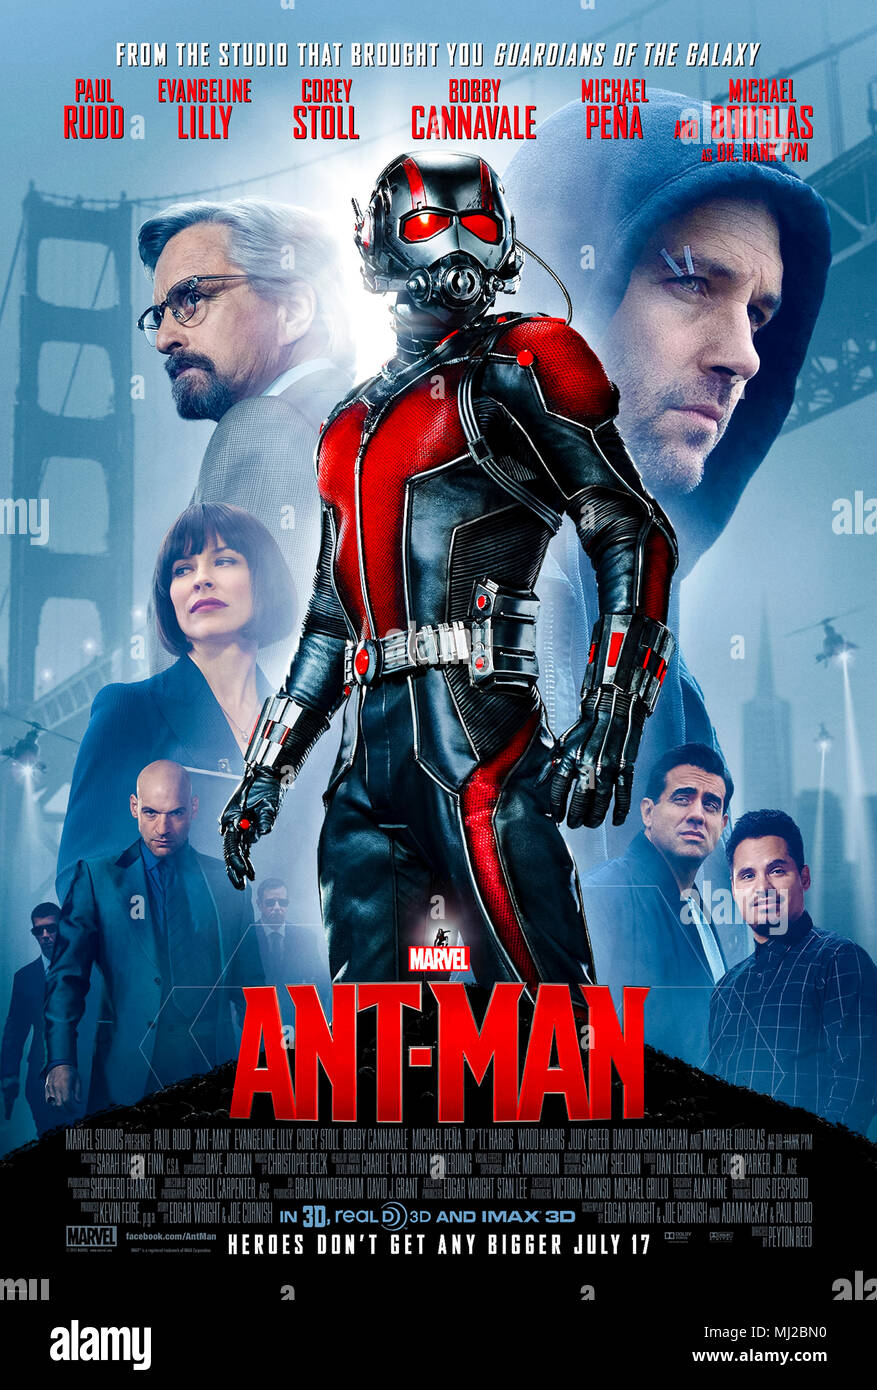 Ant-Man (2015) directed by Peyton Reed and starring Paul Rudd, Michael Douglas and Corey Stoll. Scott Lang becomes Ant-Man with the help of Dr. Hank Pym’s amazing suit. Stock Photo